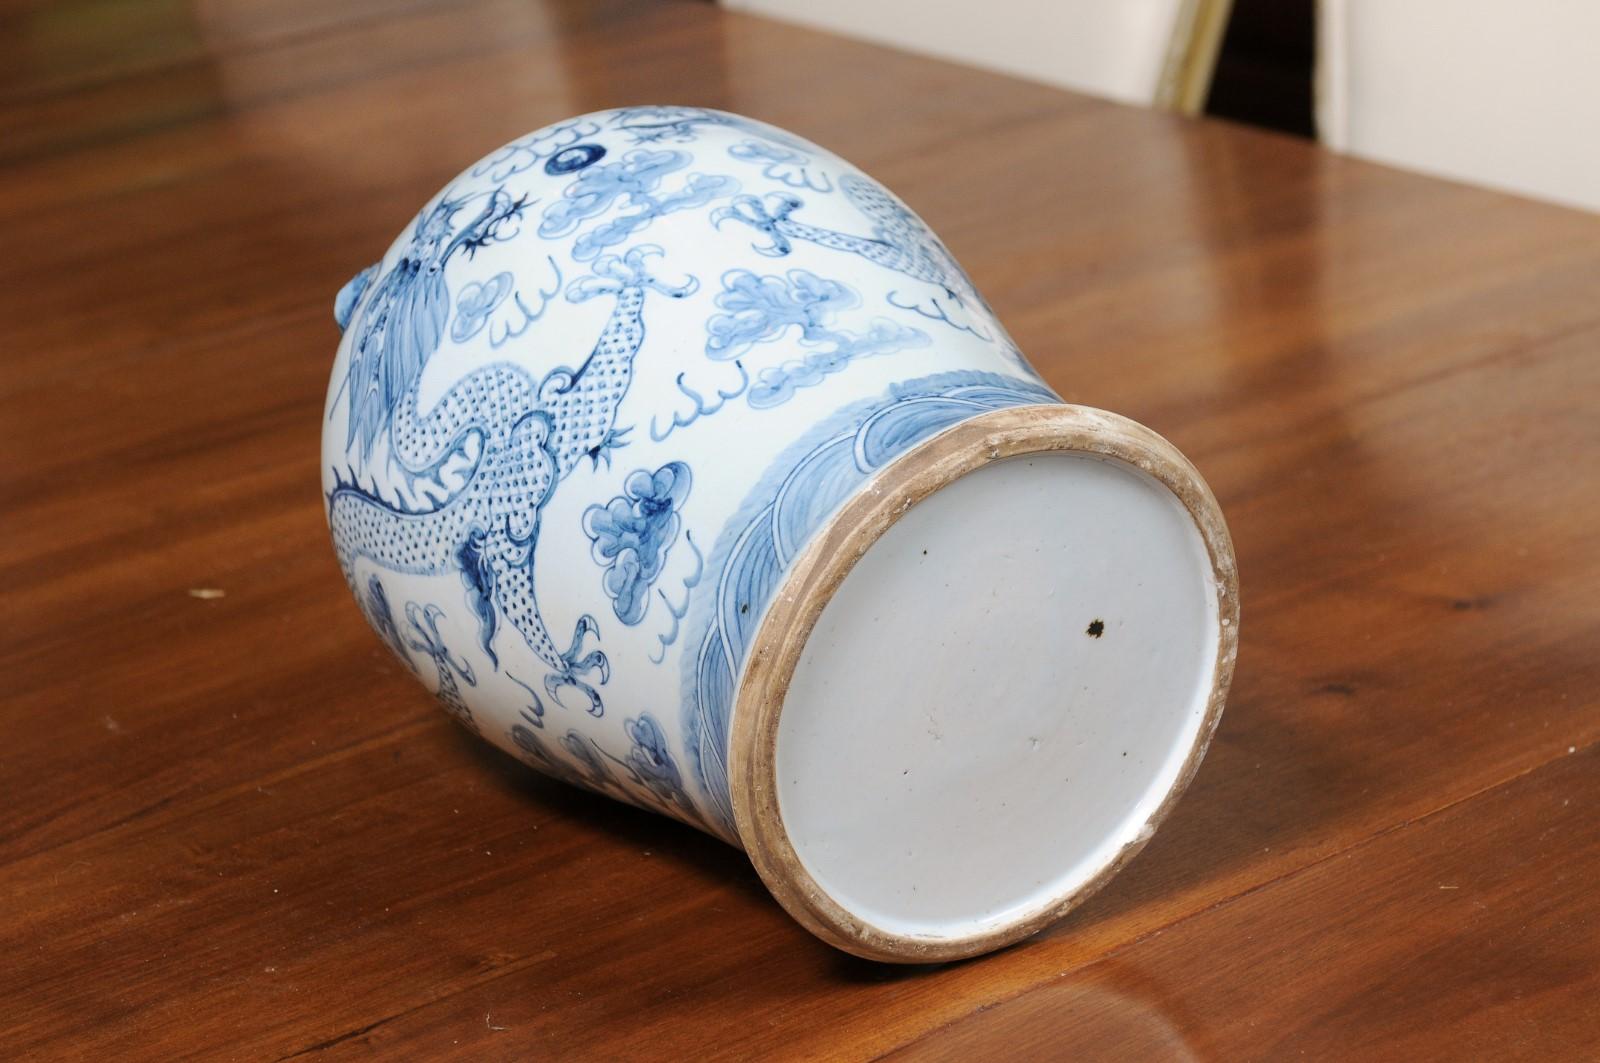 Chinese Export 20th Century Blue and White Porcelain Vase with Dragon Motifs For Sale 7